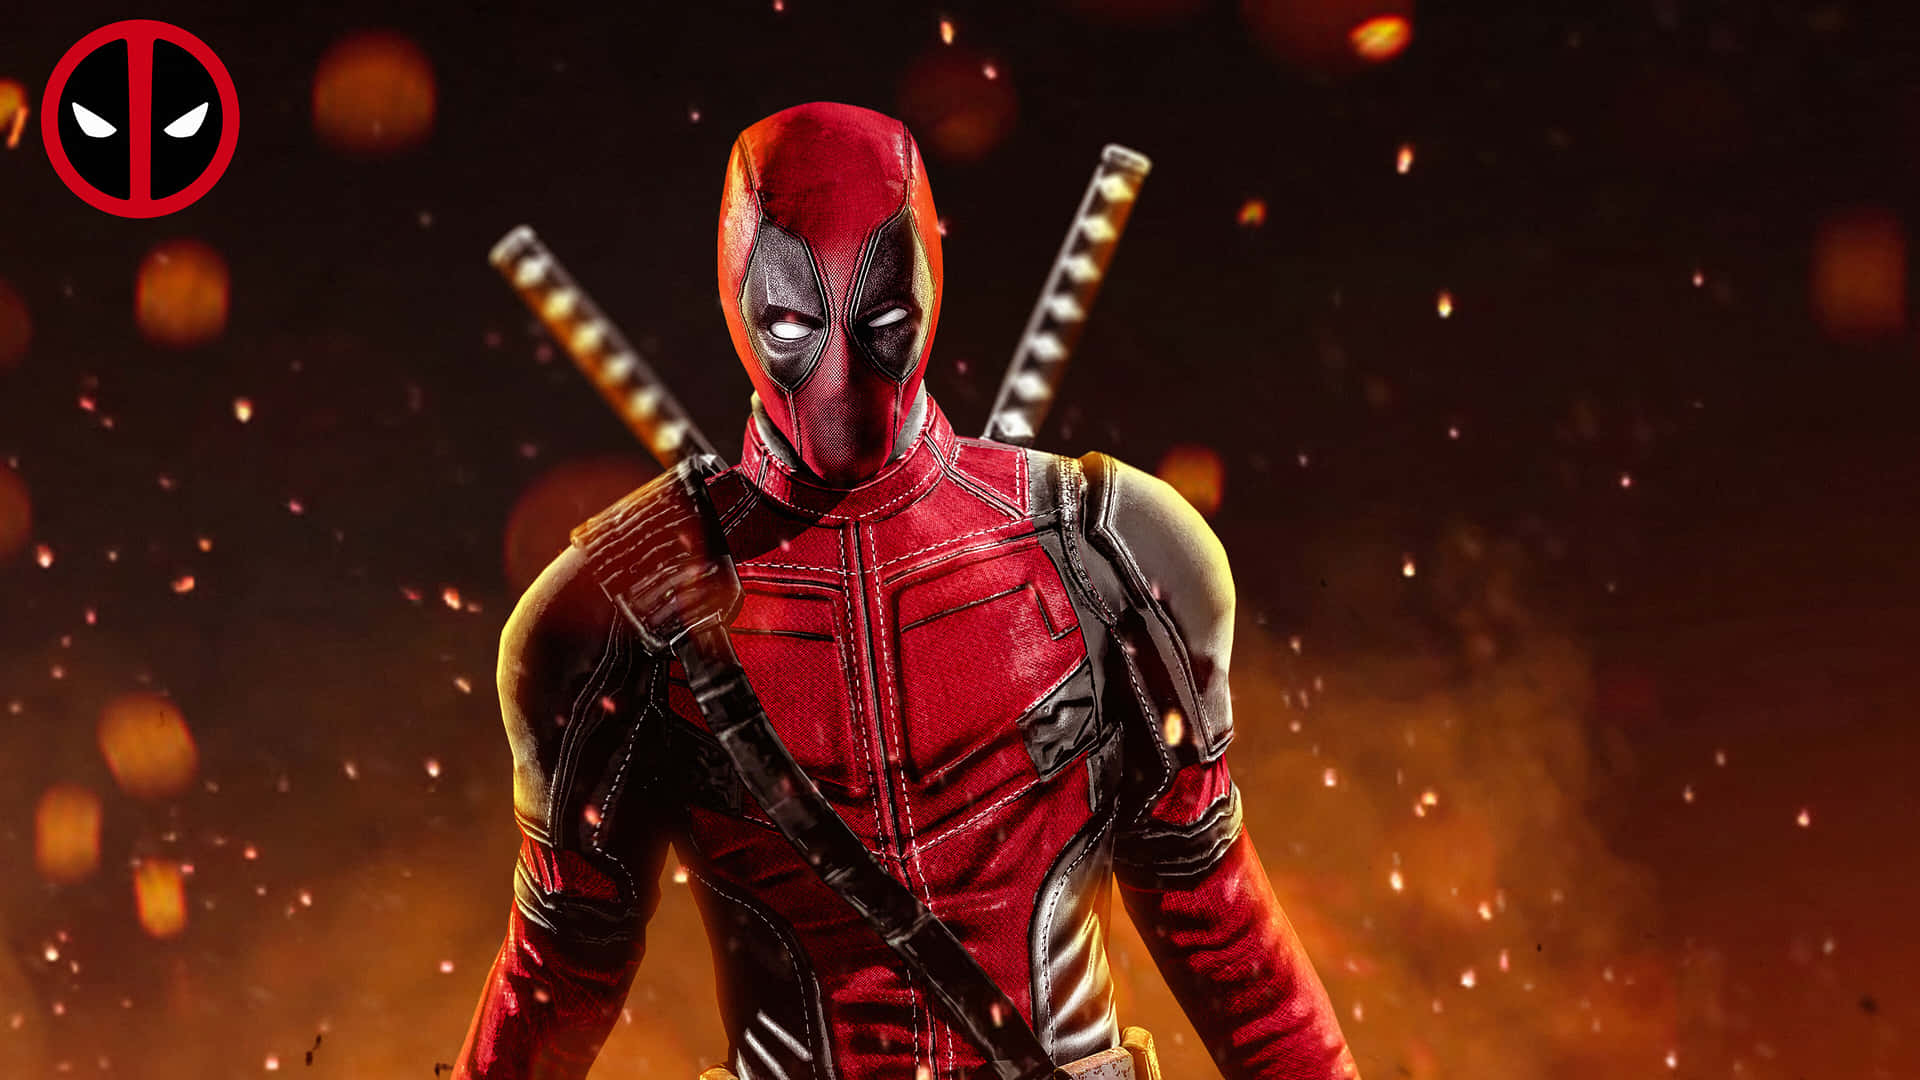 'Deadpool, the irreverent, foul-mouthed antihero'